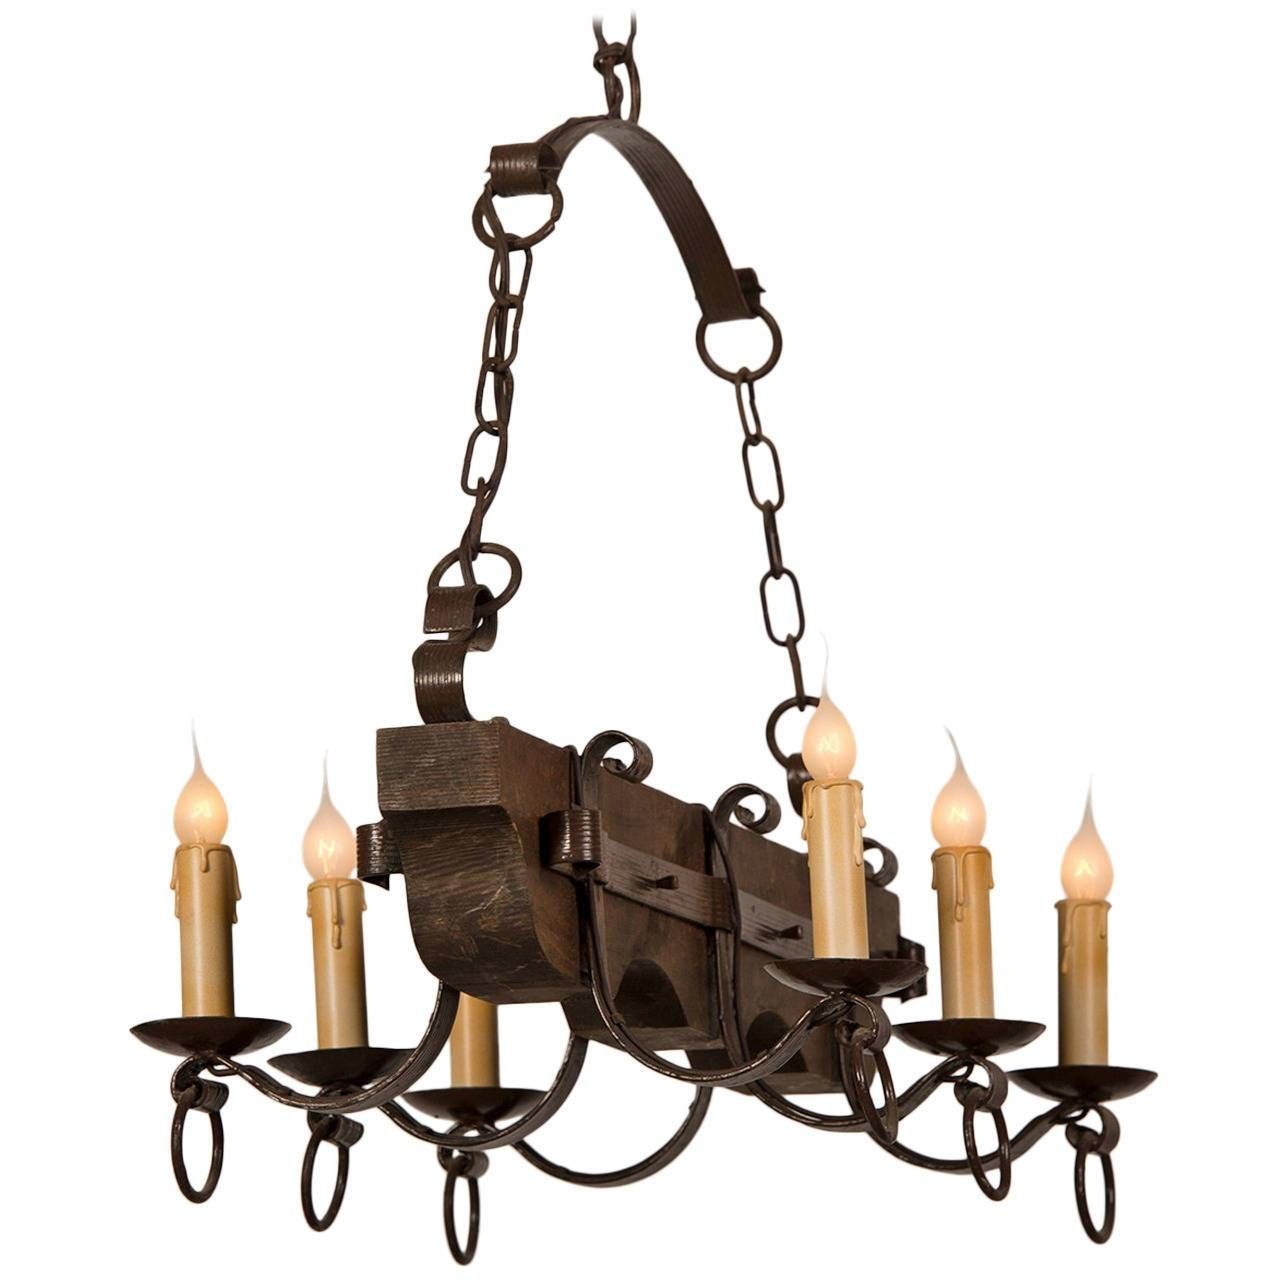 Black Wrought Iron Chandelier Lighting | Roselawnlutheran For Wrought Iron Pendant Lights For Kitchen (View 14 of 15)